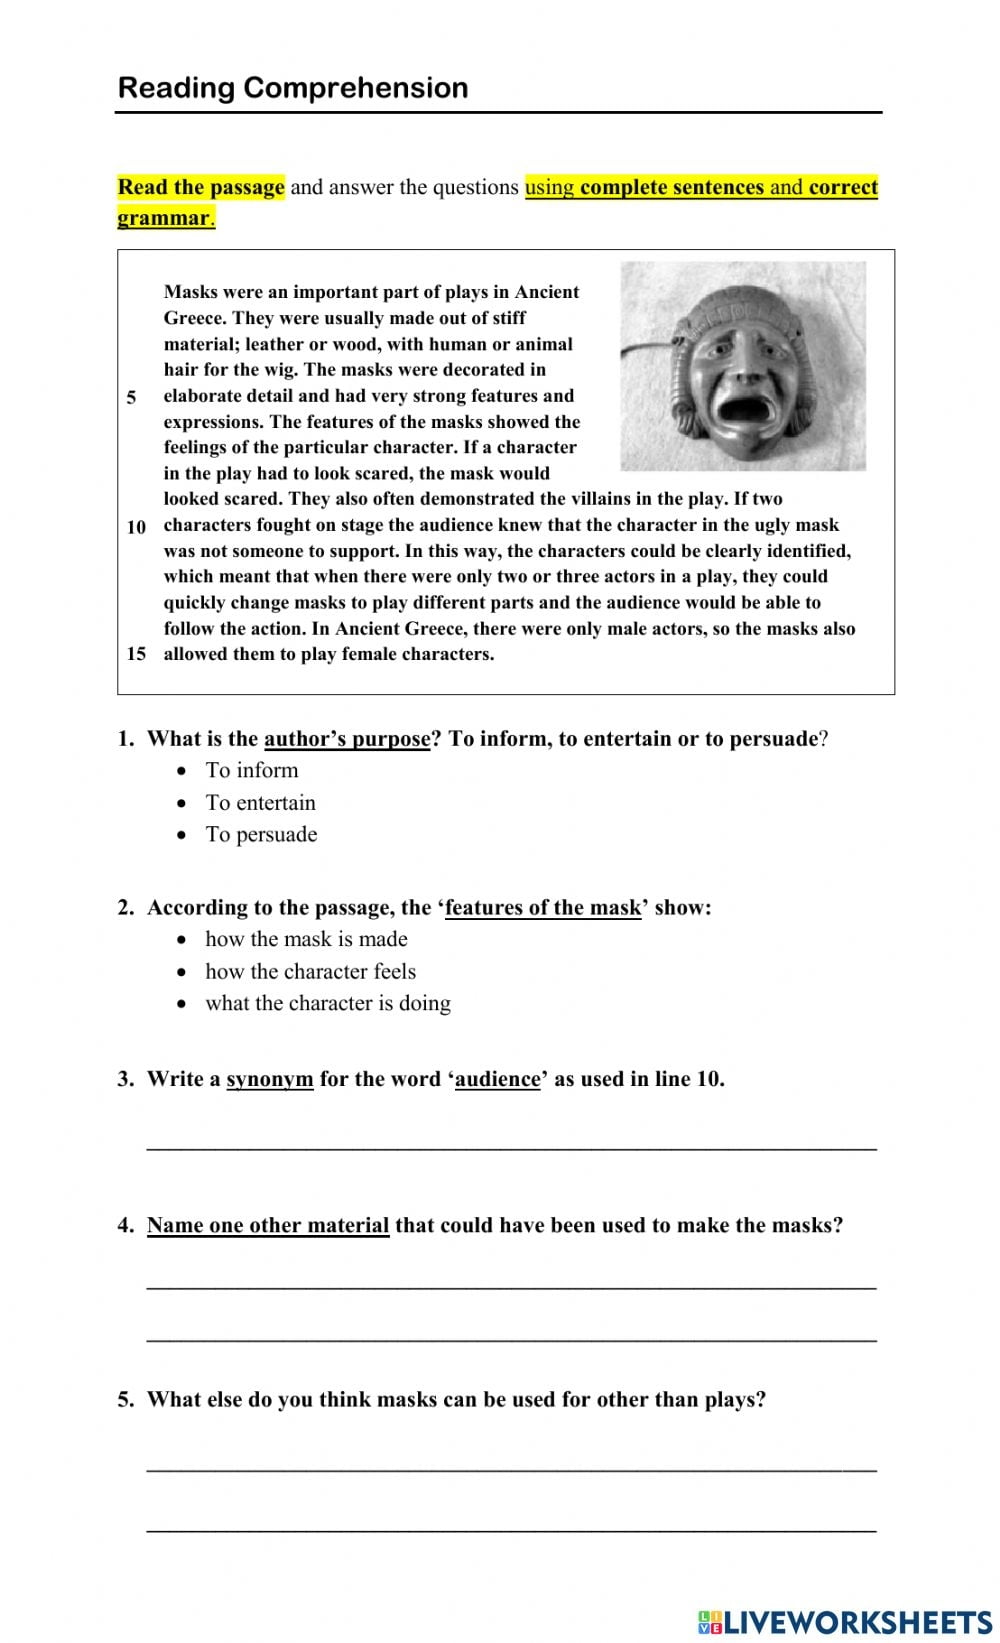 Evaluative Questions Reading Comprehension Worksheets